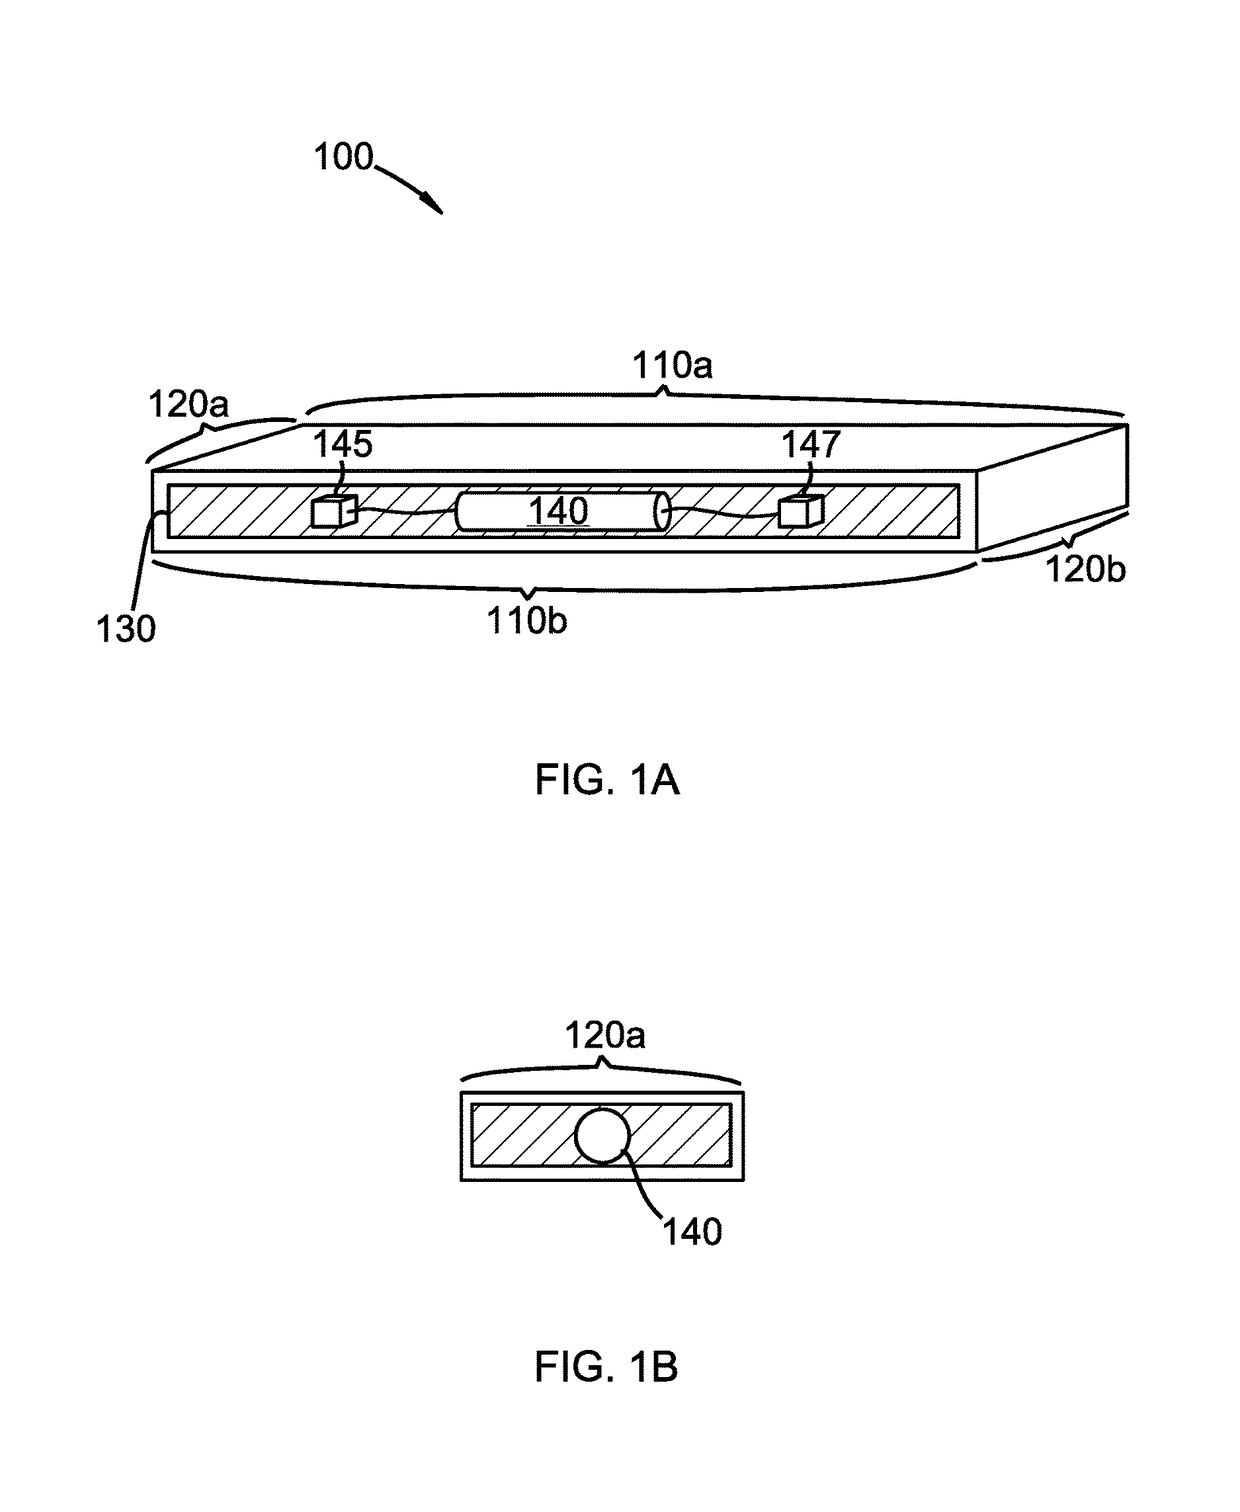 Window blind with pressure sensor which activates light and sound in sequence